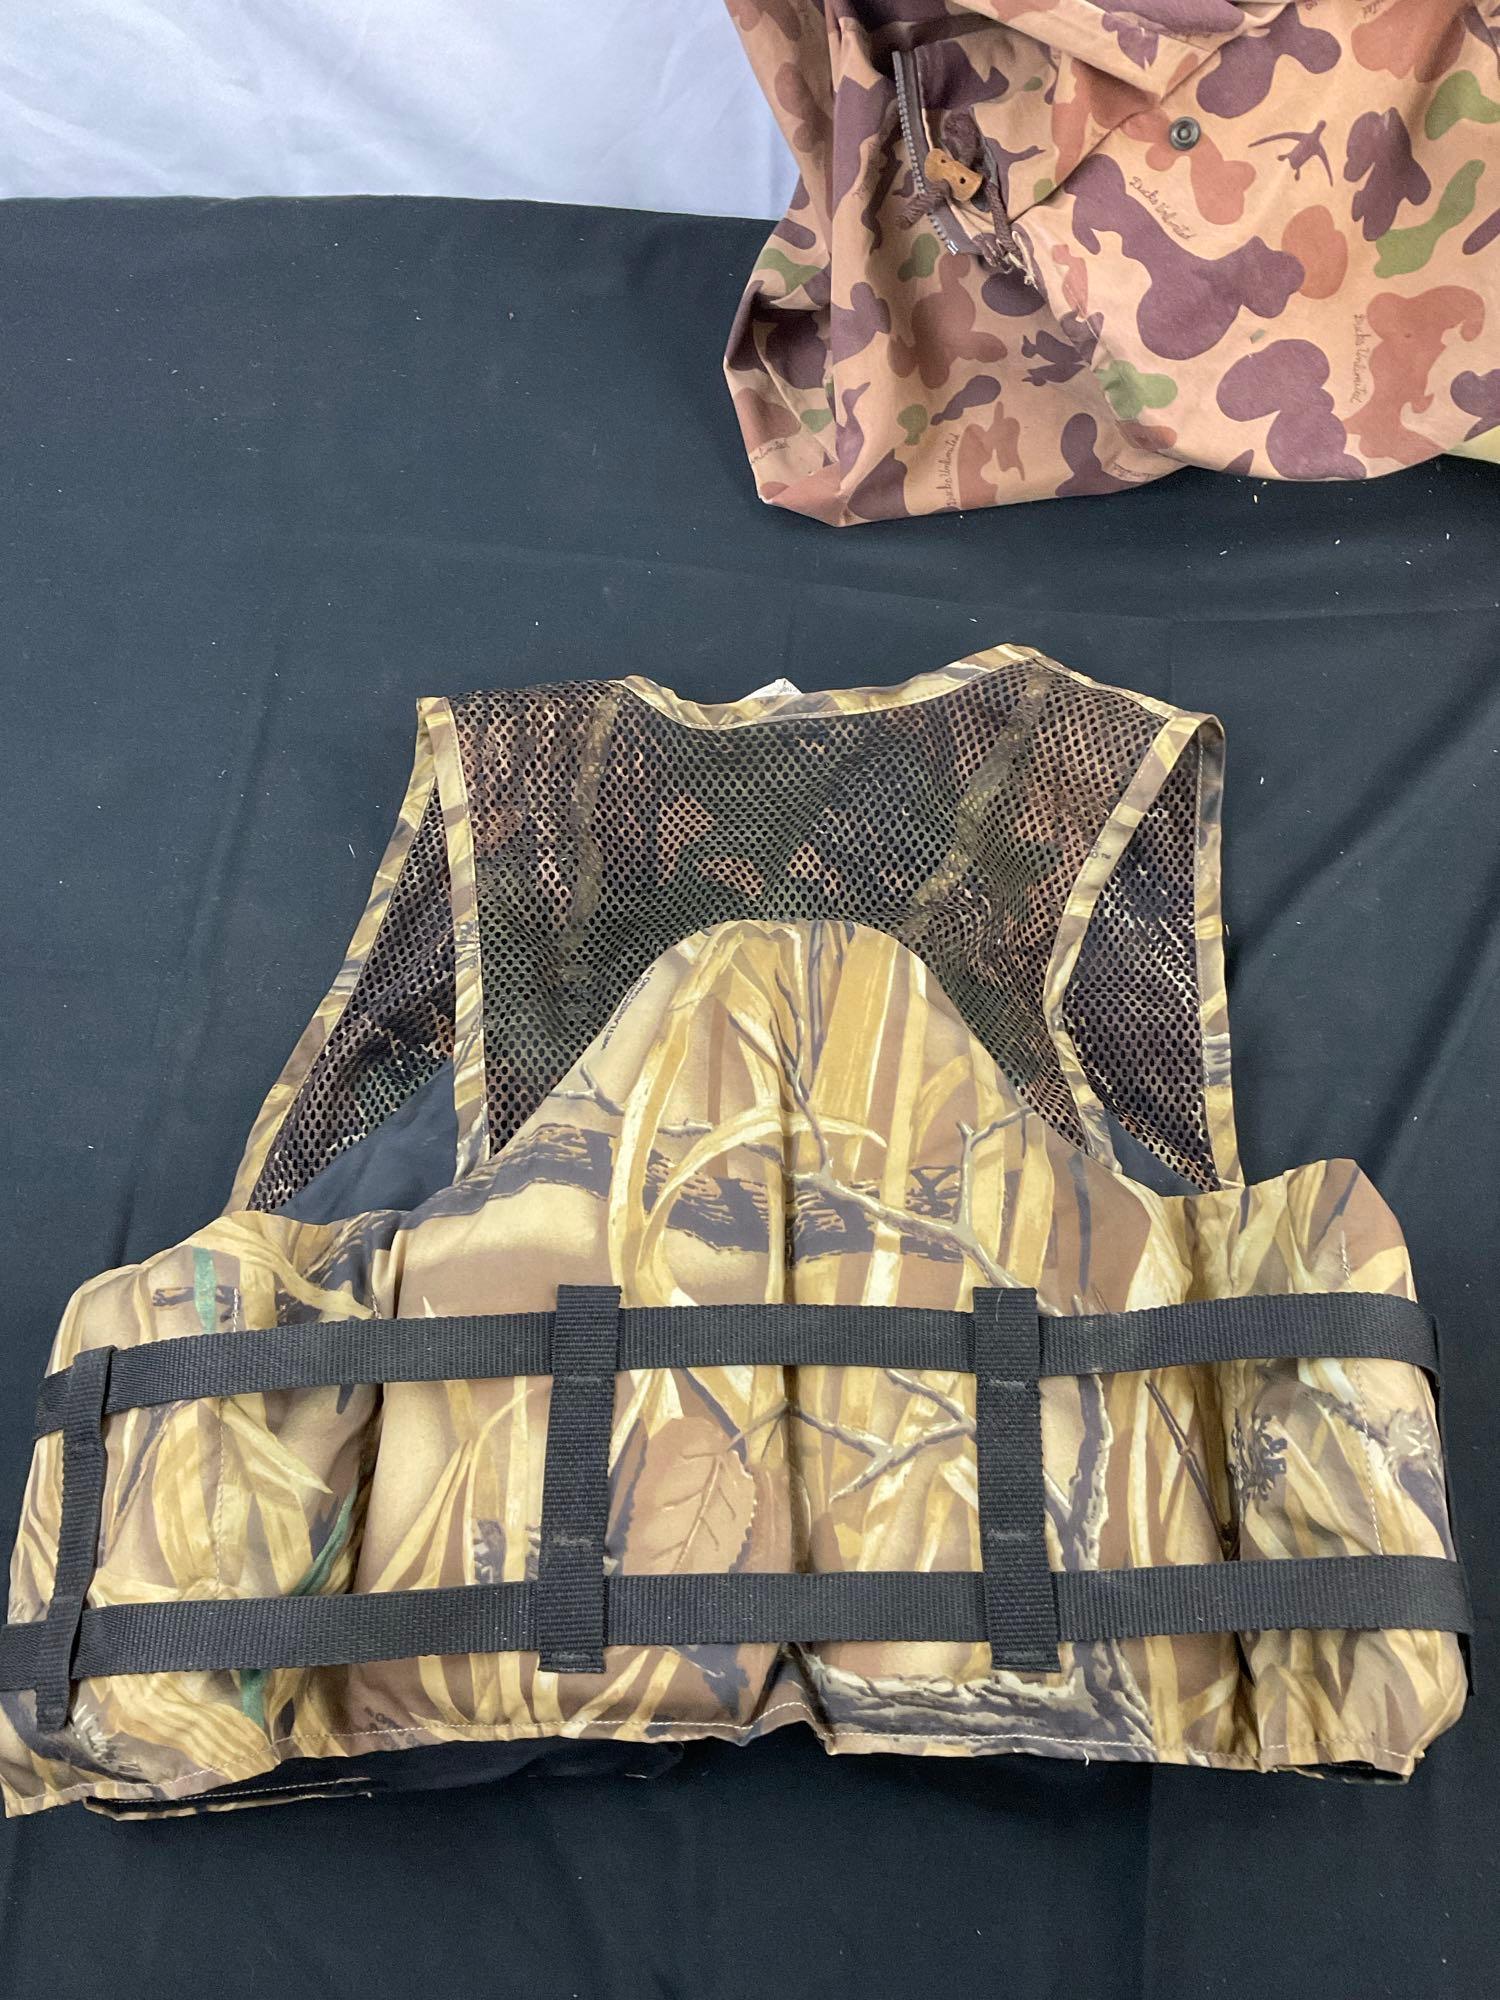 19 pcs Vintage Men's Hunting Outdoor Wear Clothing. Ducks Unlimited, Master Sportsman. See pics.